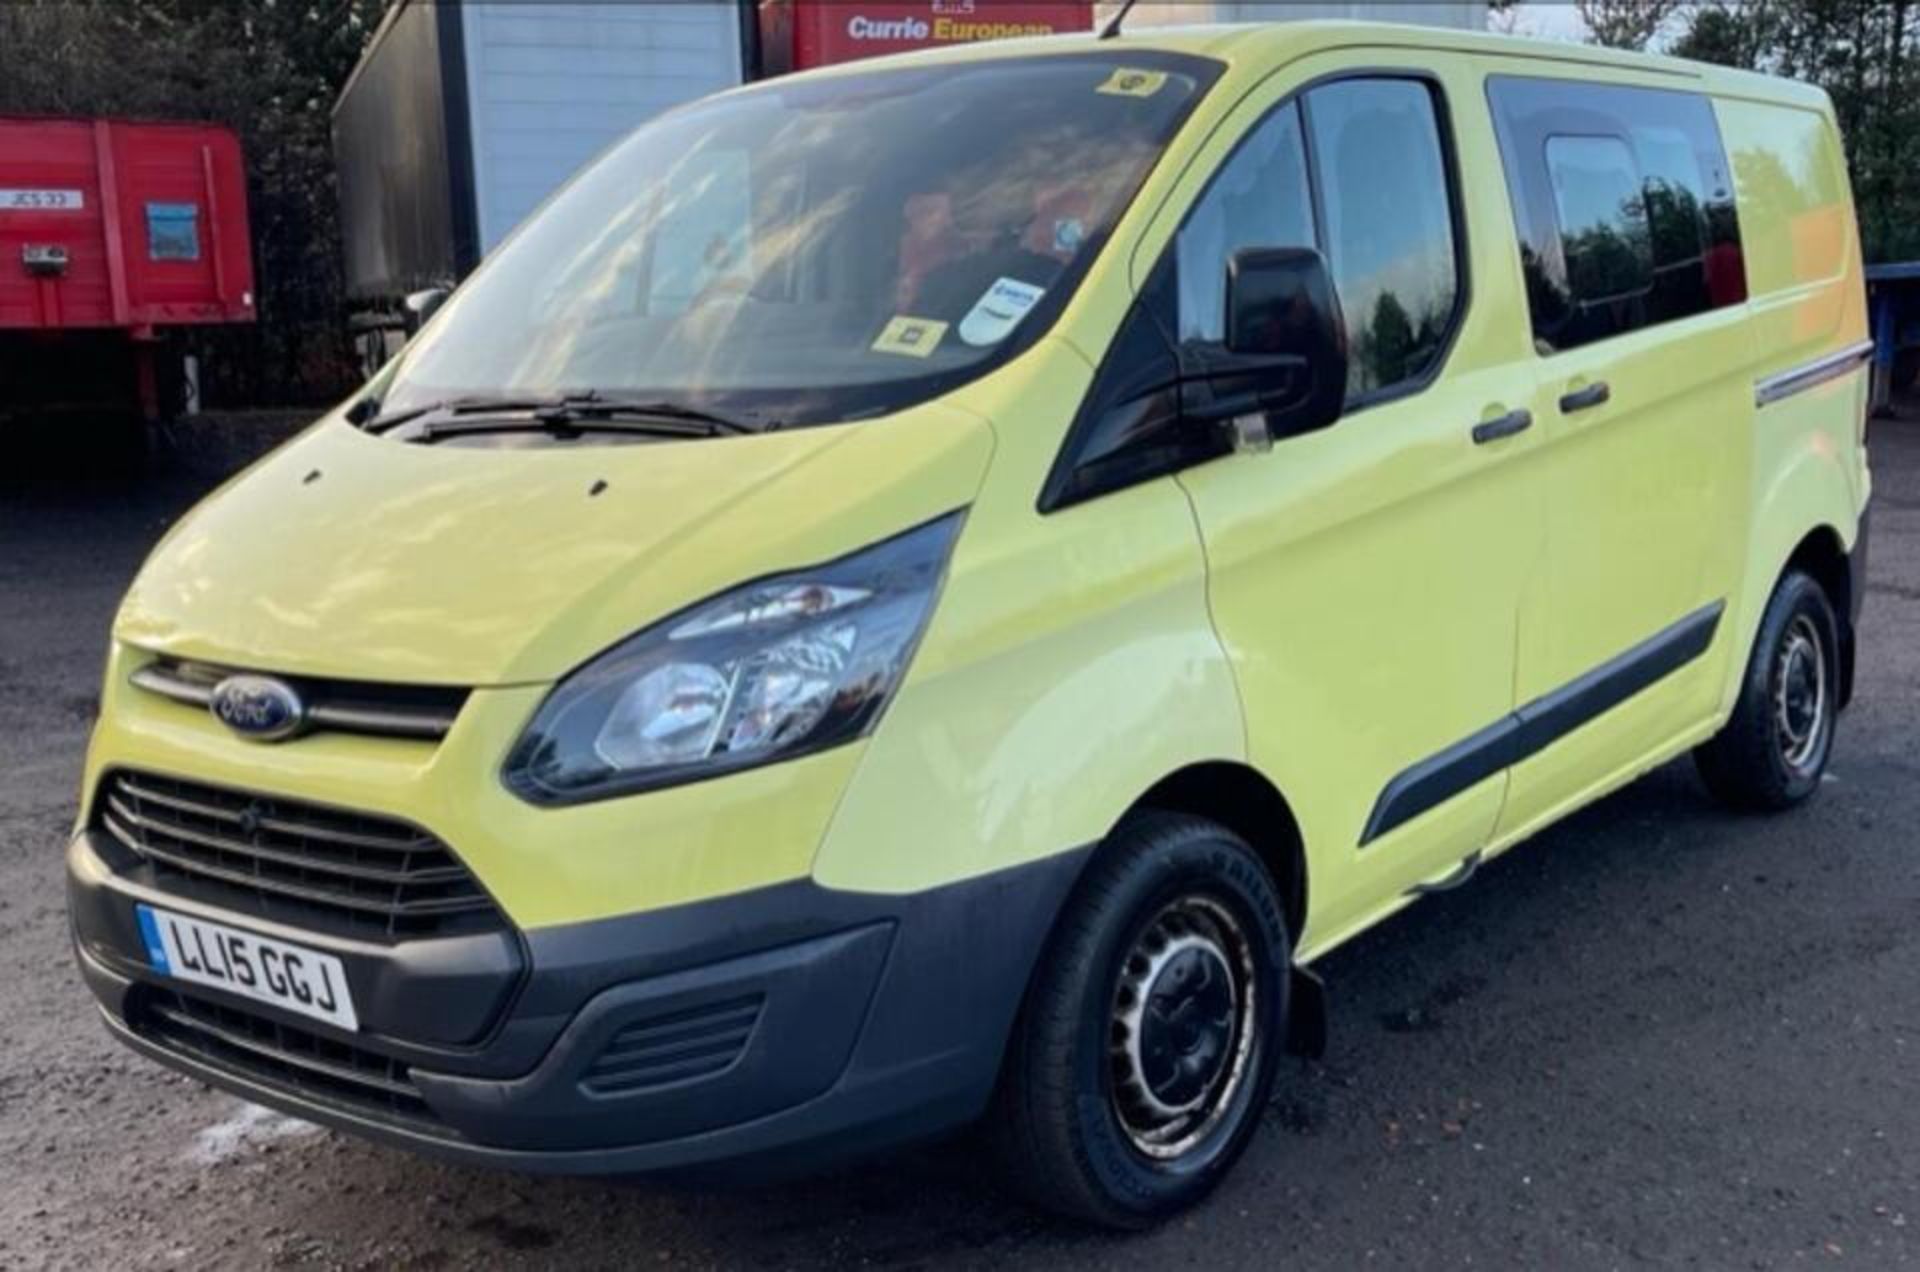 2015 FORD TRANSIT - 129K MILES - HPI CLEAR- READY FOR ACTION!